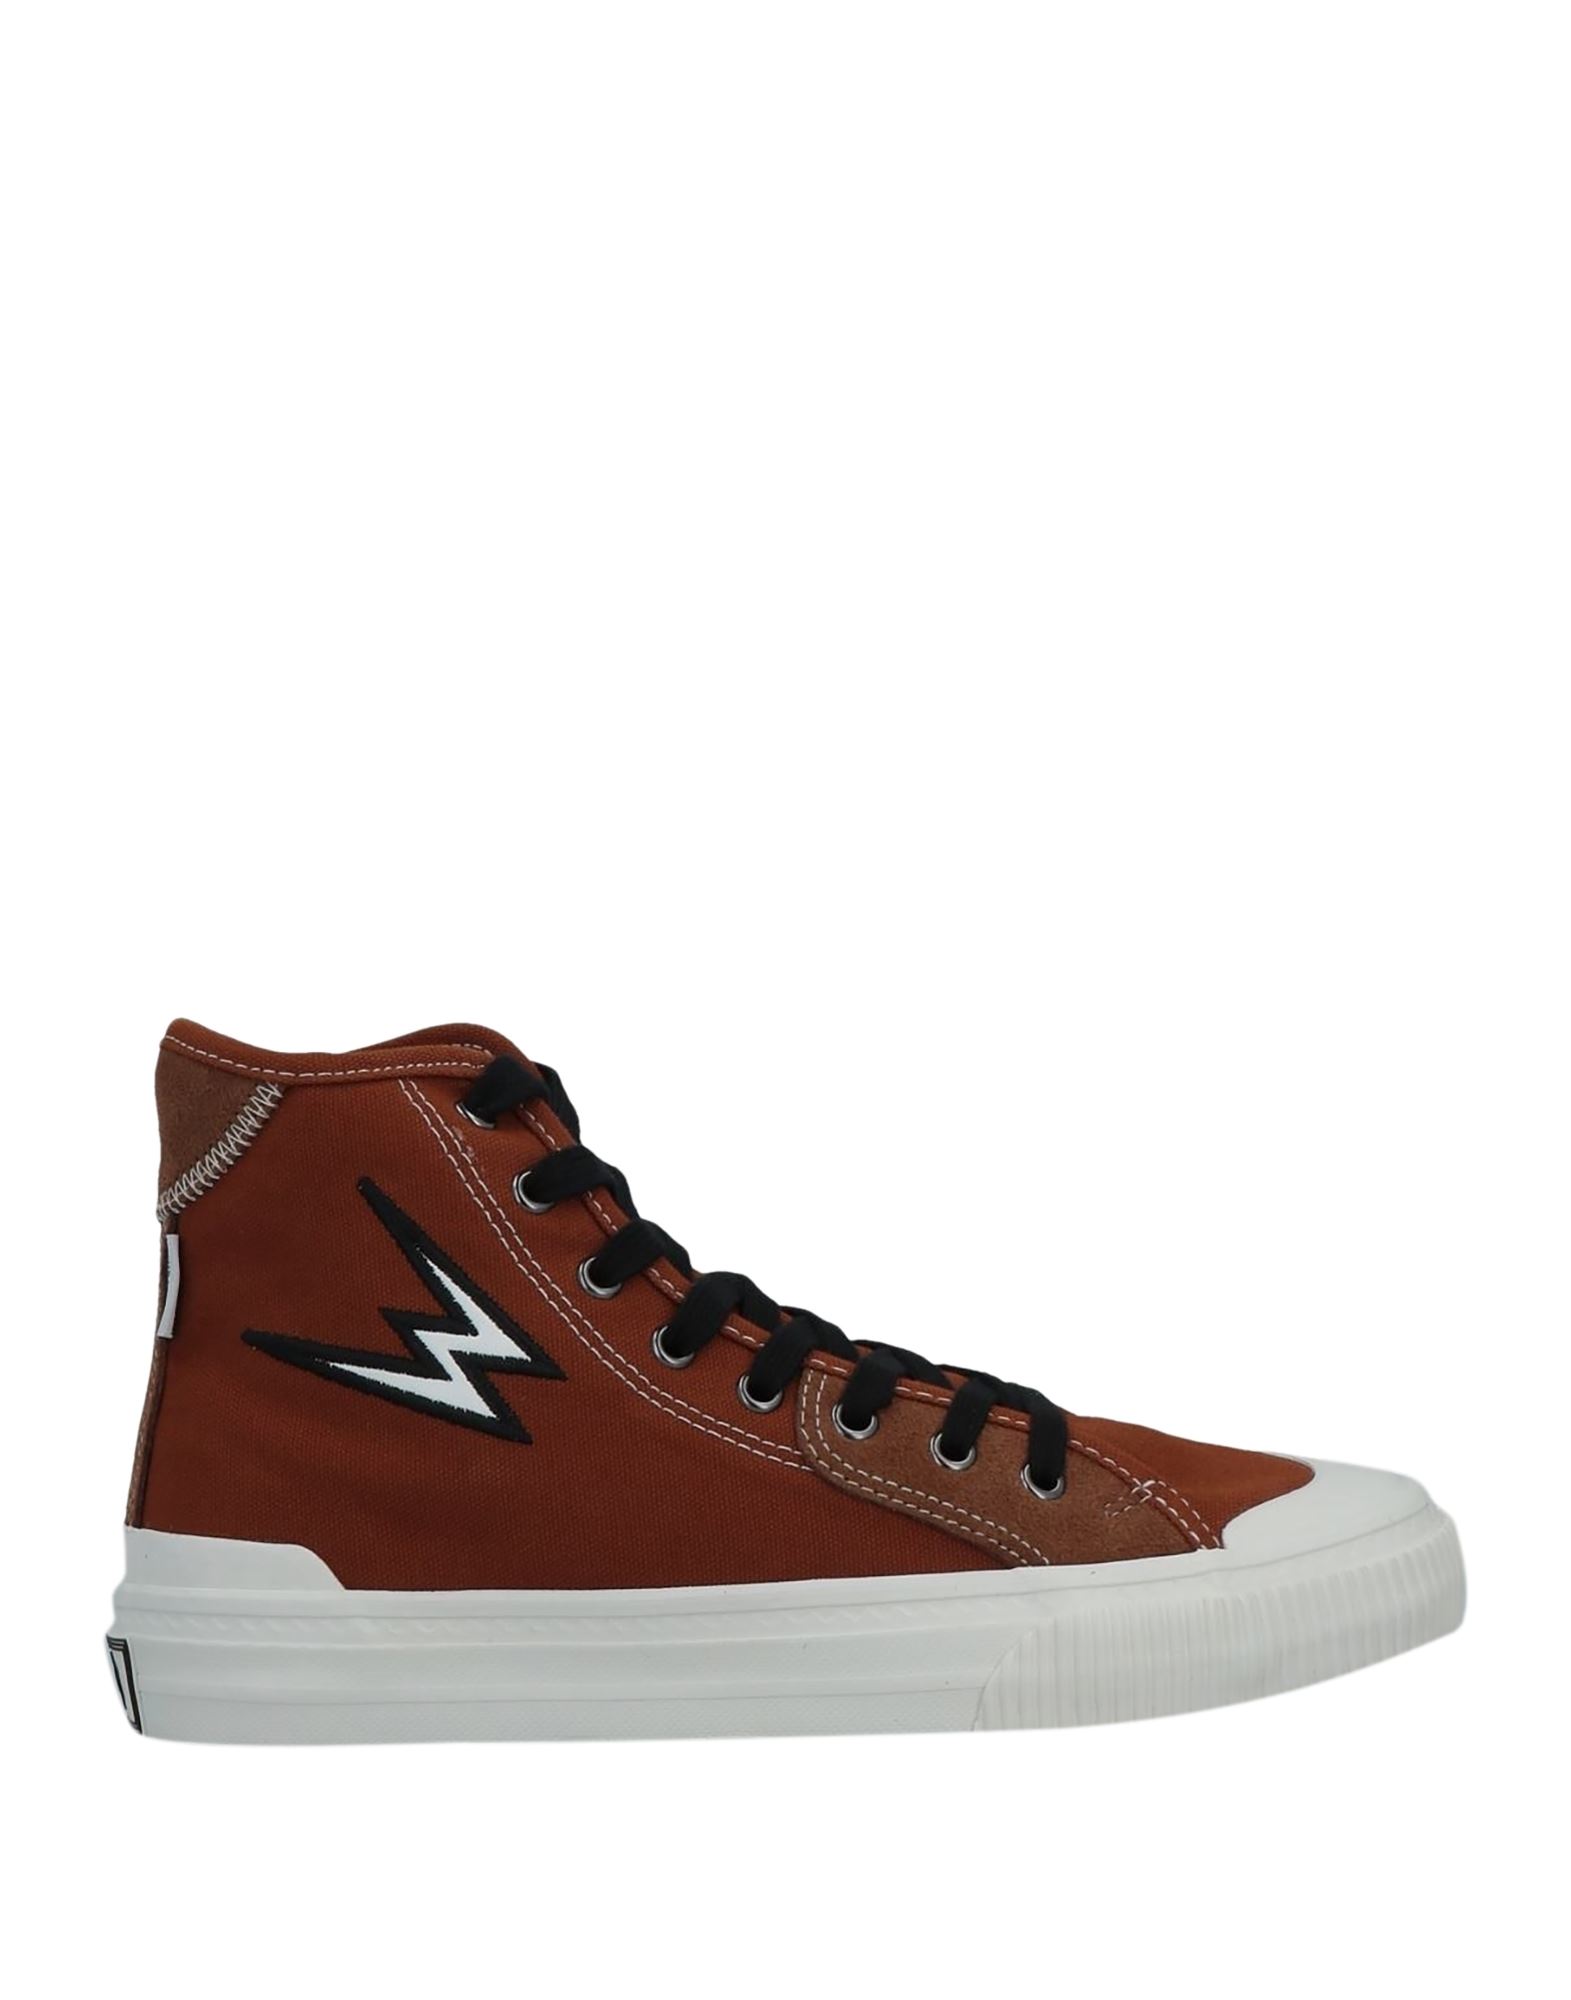 Moa Master Of Arts Sneakers In Tan